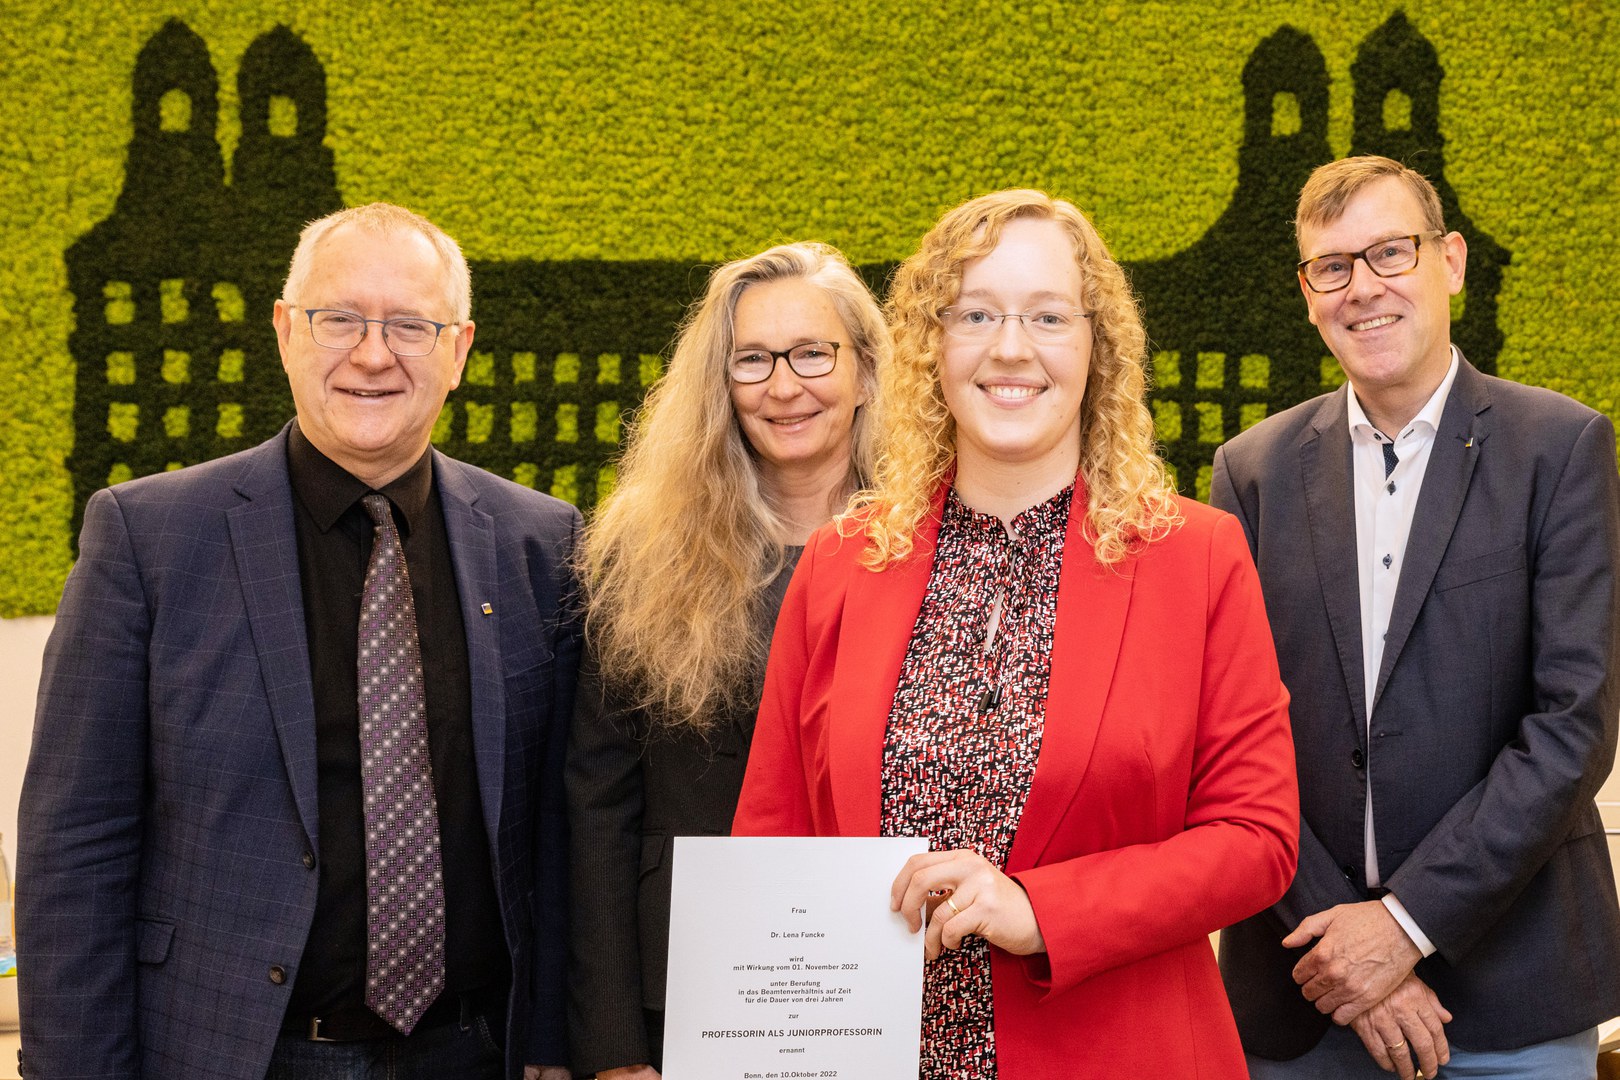 At the ceremony - Prof. Dr. Dr. h. c. Michael Hoch, Rector of the University of Bonn, Prof. Dr. Ulrike Thoma, founding spokesperson of the Transdisciplinary Research Area "Matter", Jun.-Prof. Dr. Lena Funcke, new Clausius Professor, and Prof. Dr. Peter Vöhringer, founding spokesperson of the TRA "Matter" (from left to right)